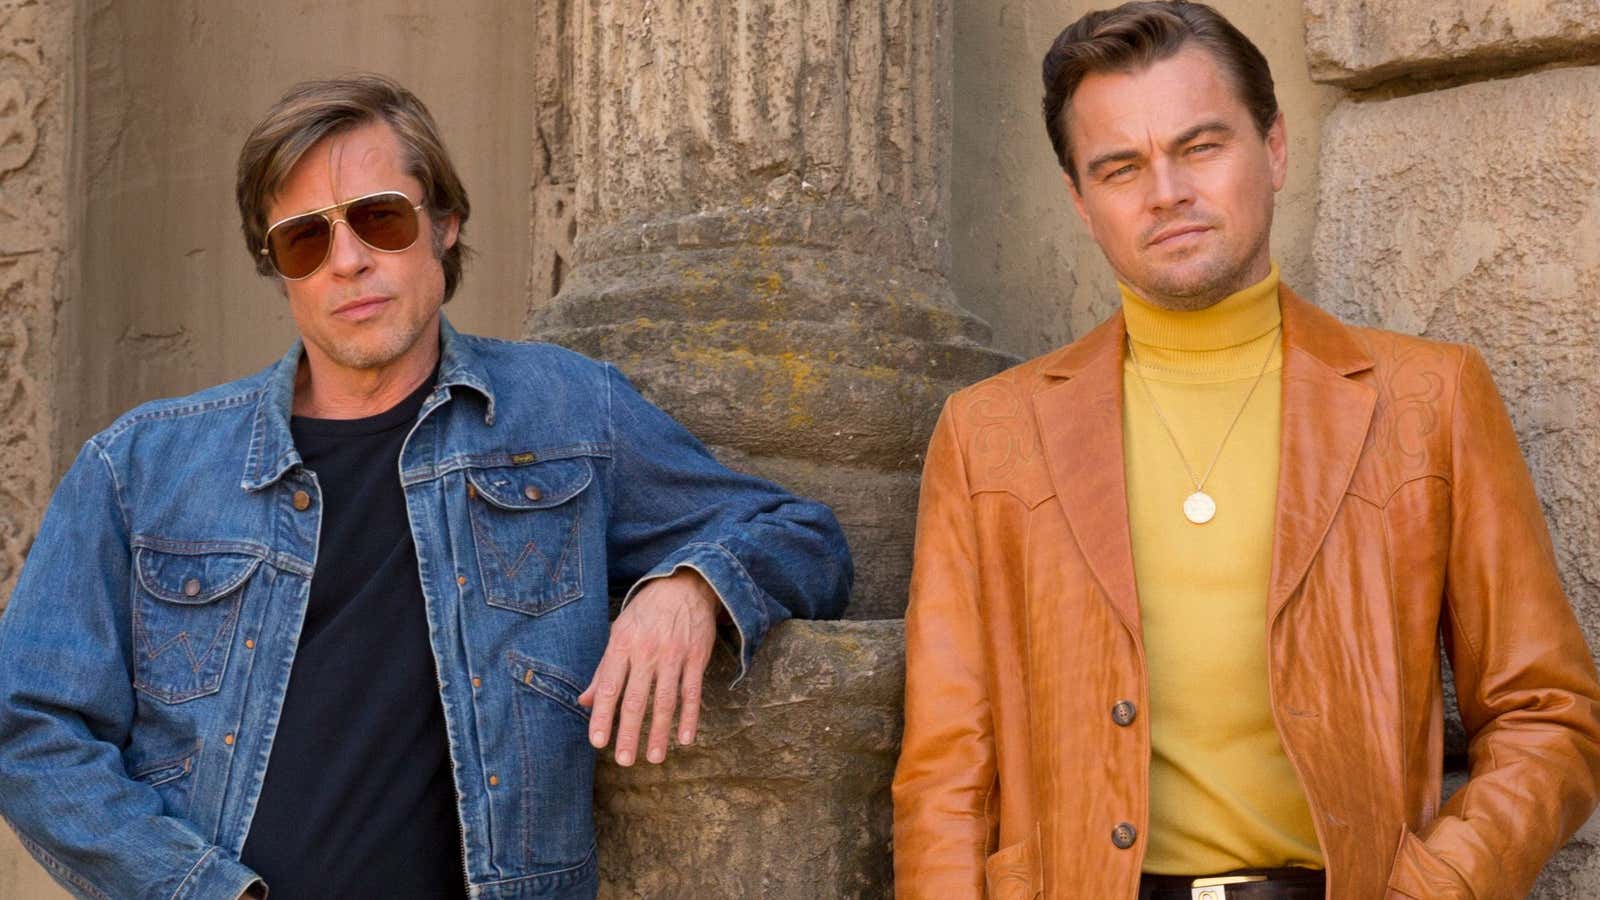 Brad Pitt and Leonardo DiCaprio in “Once Upon a Time in Hollywood.”